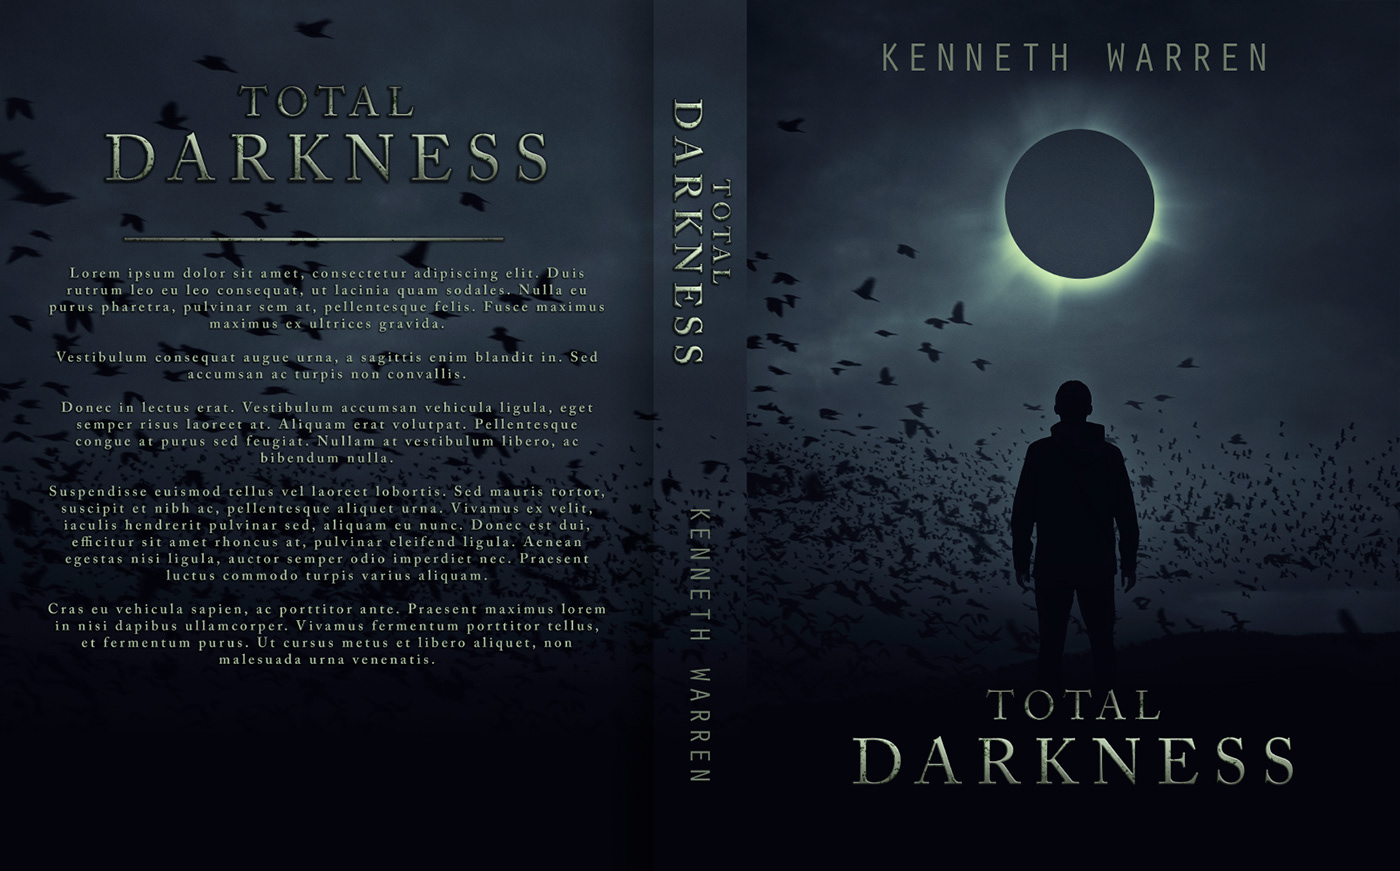 book covers cover design crows dark darkness eclipse fantasy fiction mystery thriller